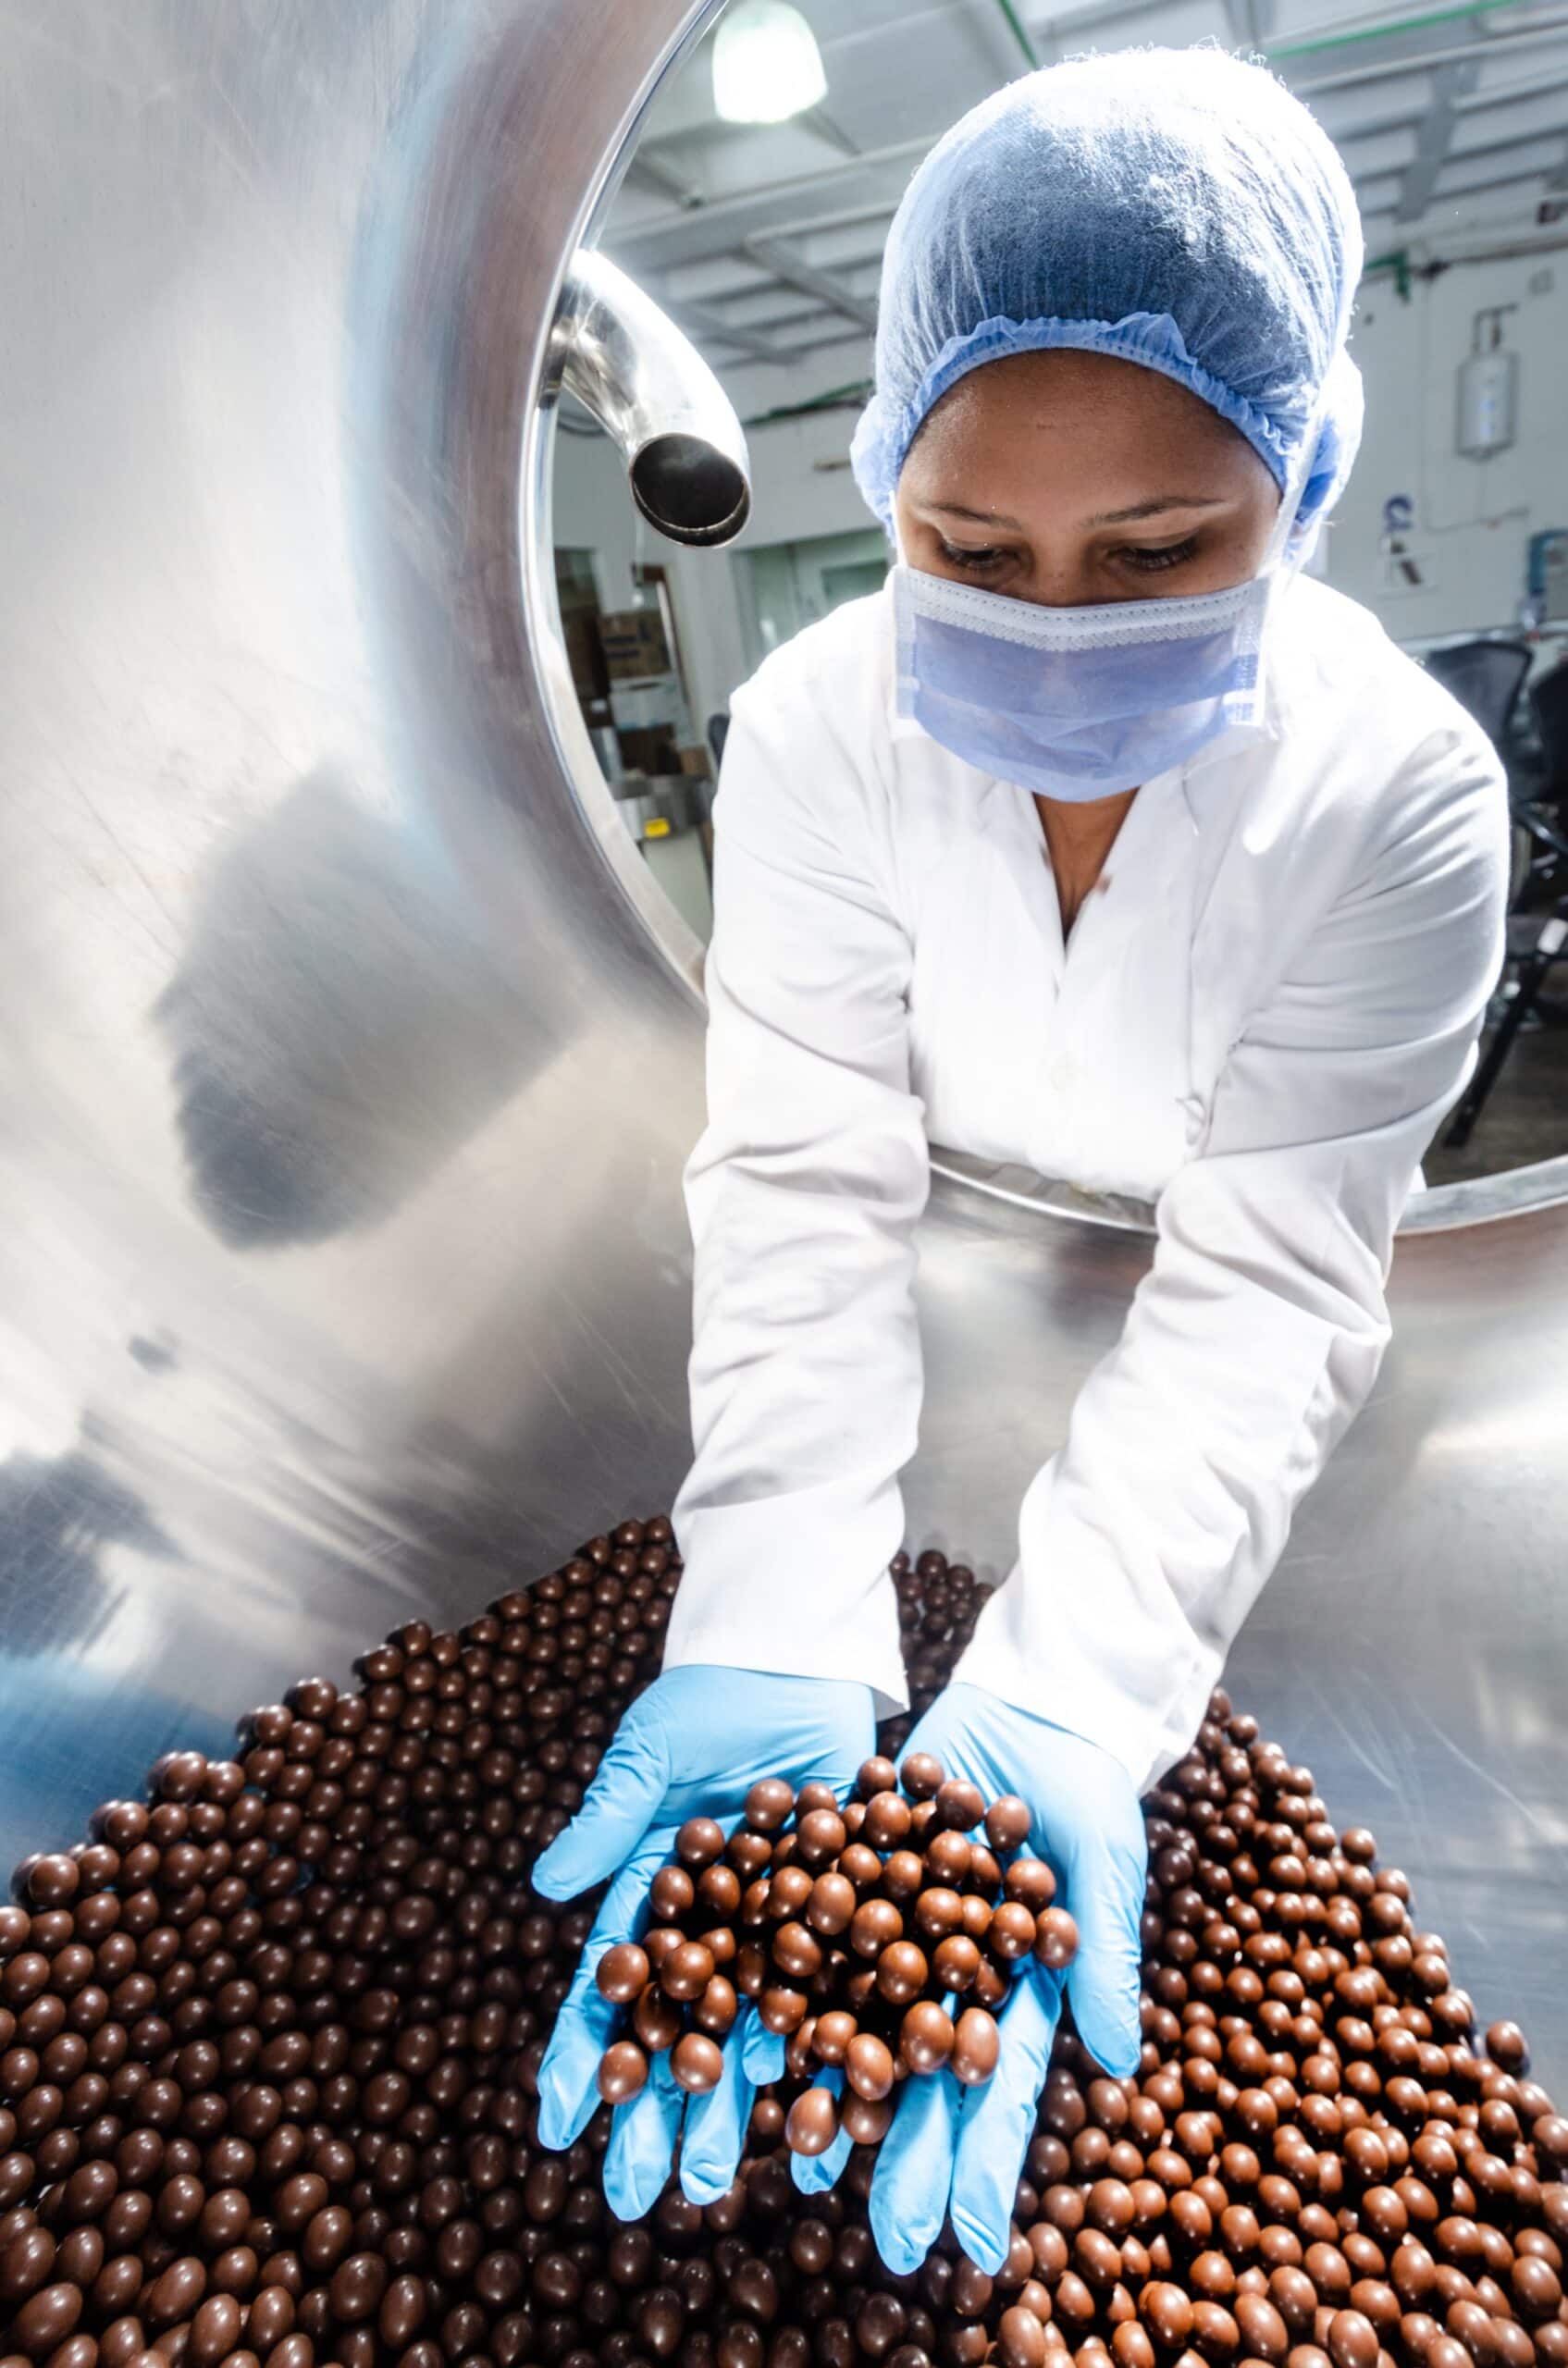 Woman wearing the appropriate protections in food facility looking at beans after reviewing alert from the Samsara EM21 environmental monitor